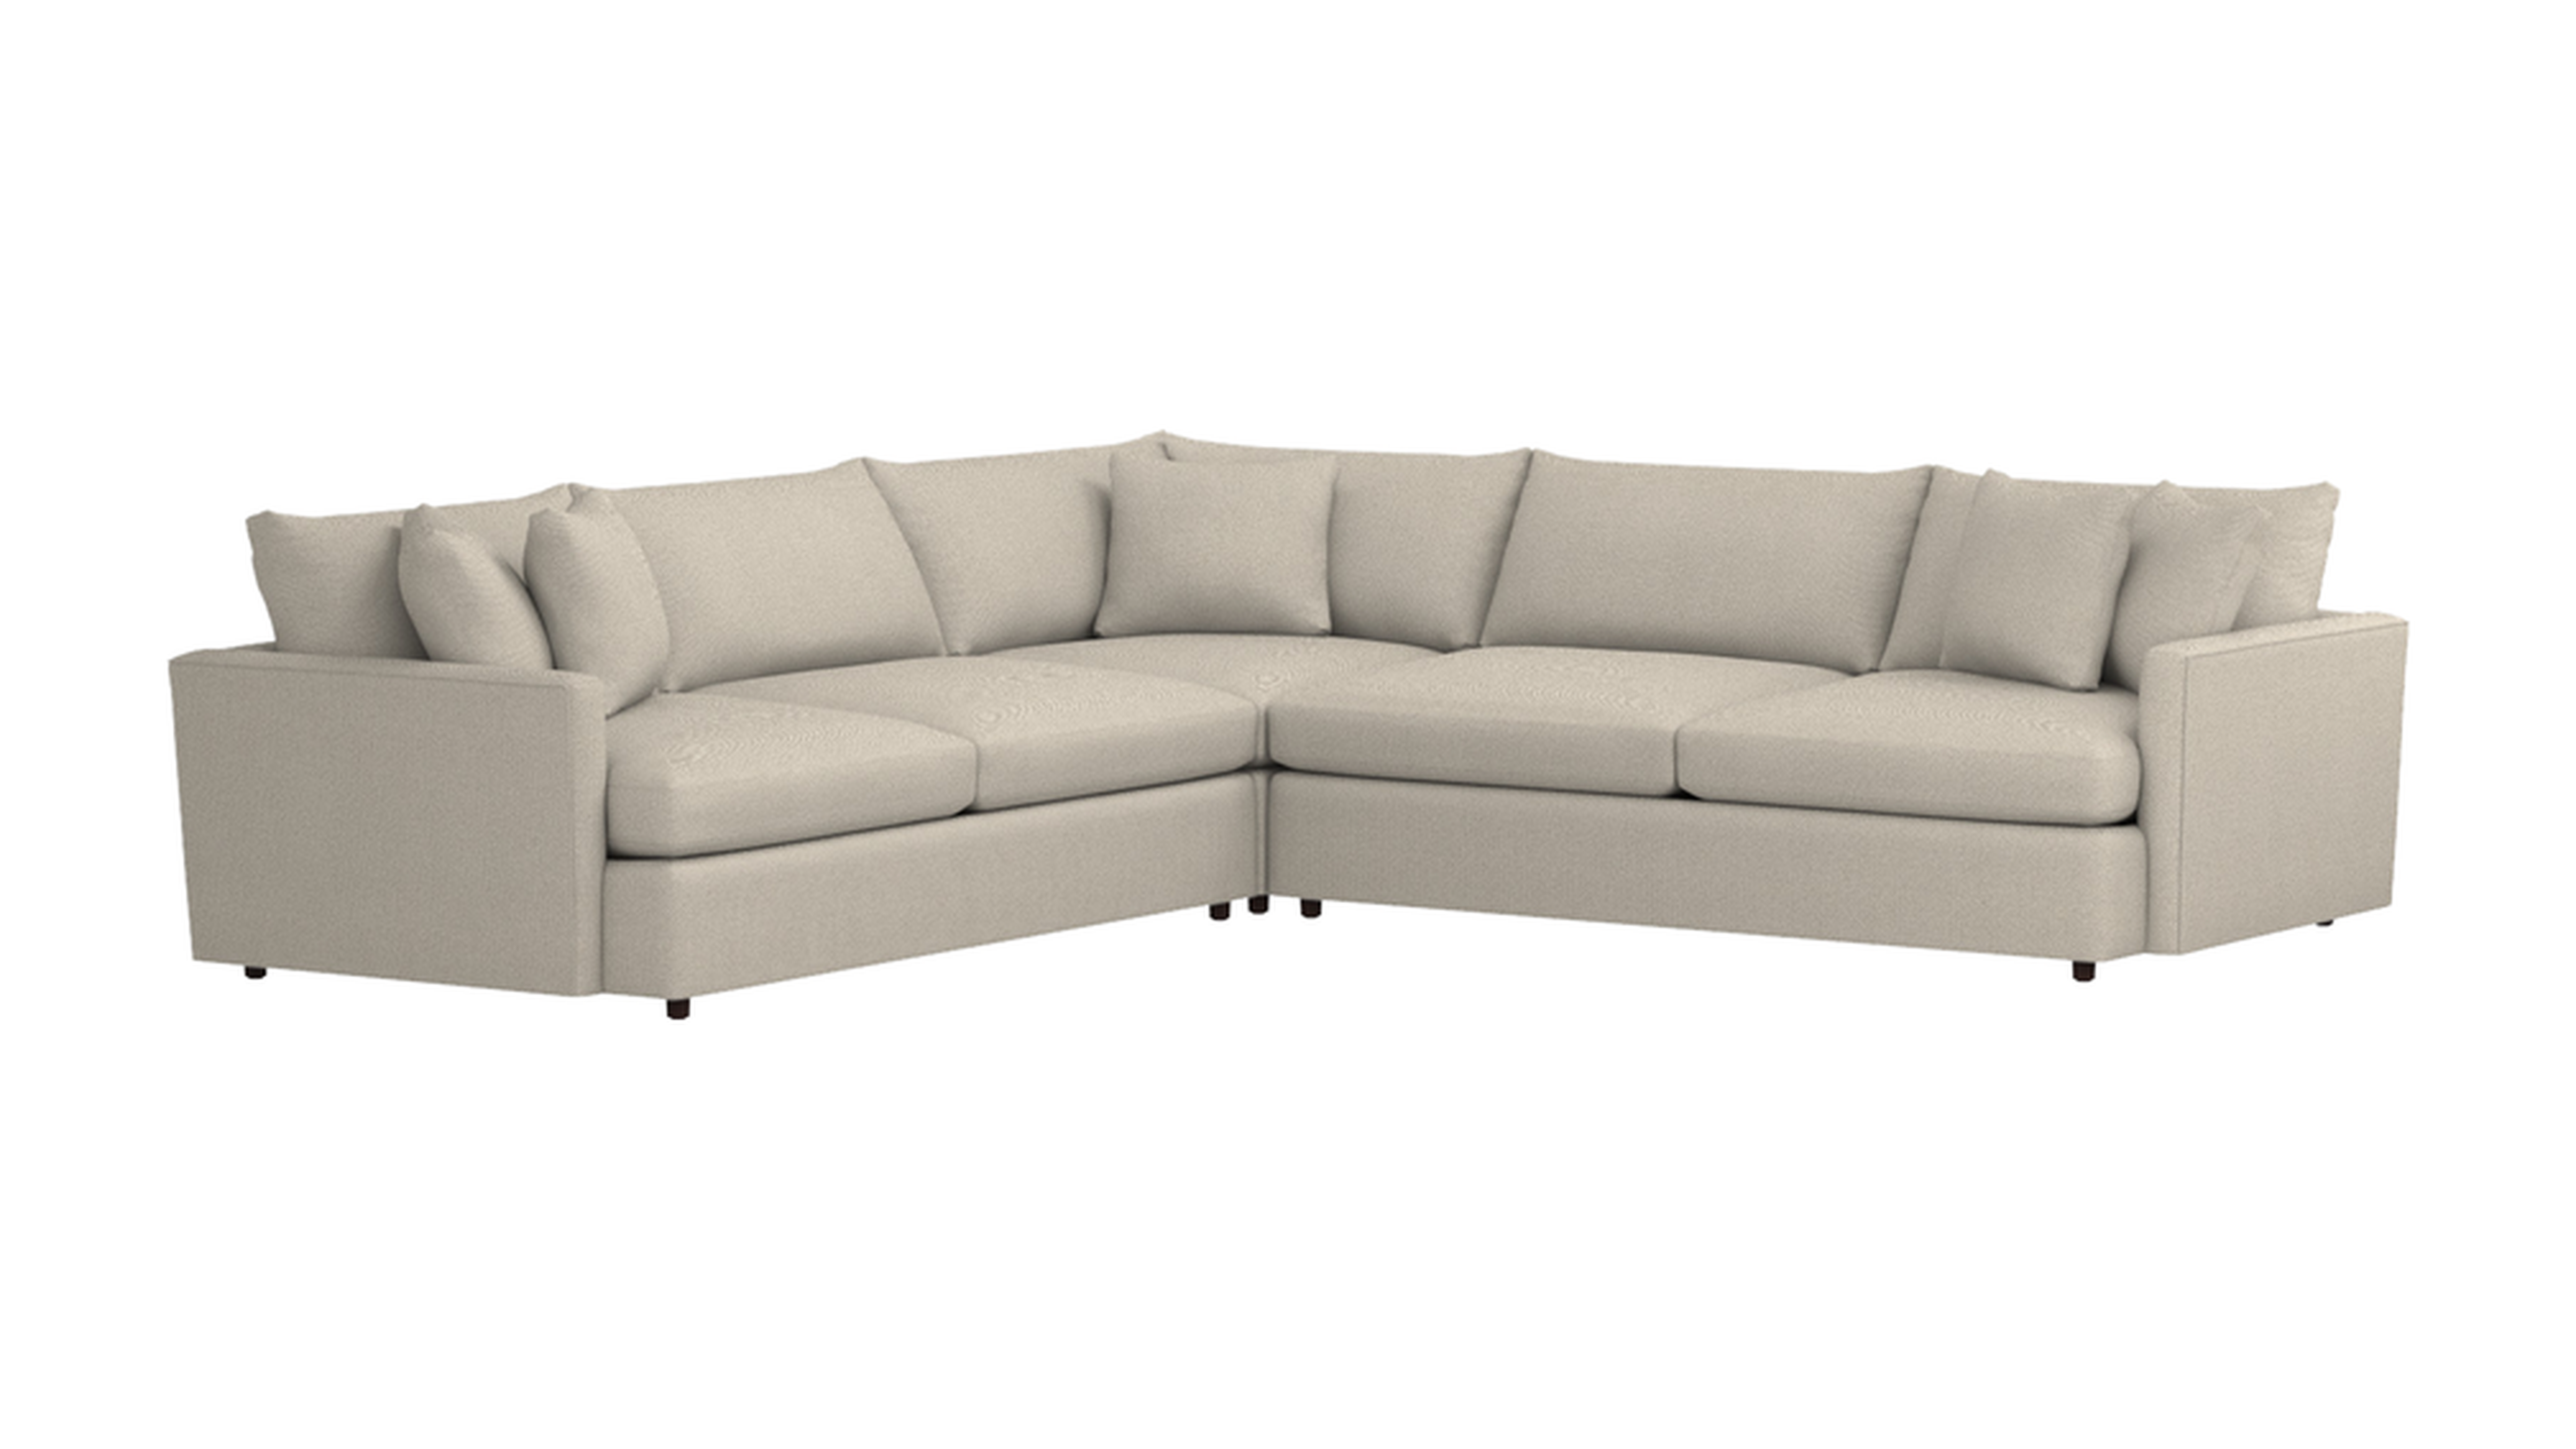 Lounge II 3-Piece Sectional Sofa - Taft, Cement - Crate and Barrel